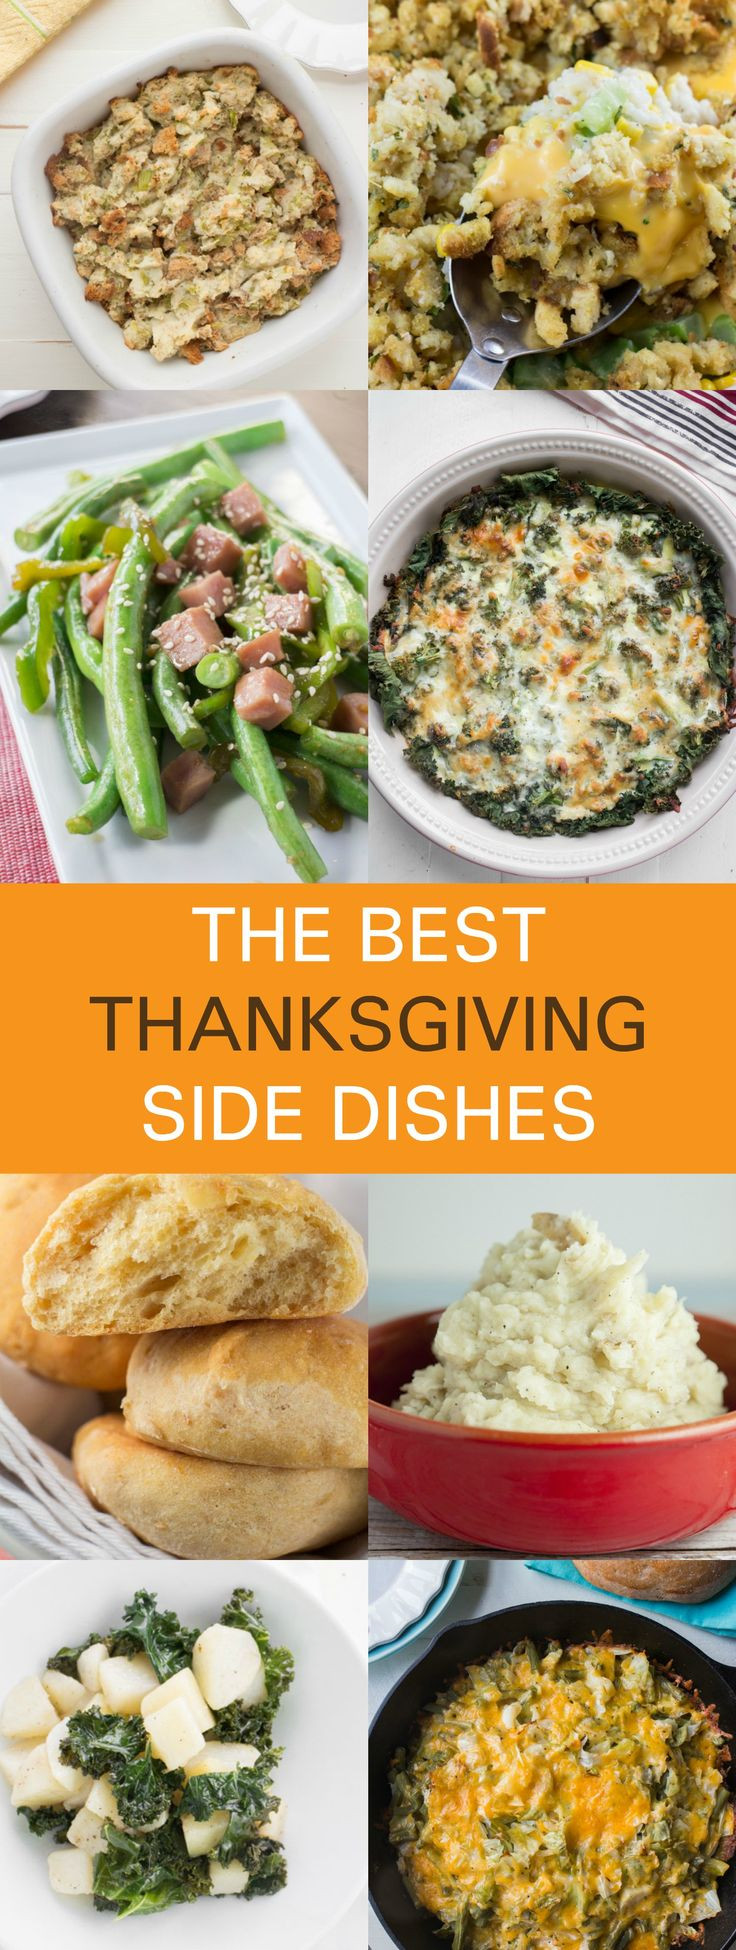 Great Thanksgiving Side Dishes
 17 Best images about Thanksgiving on Pinterest